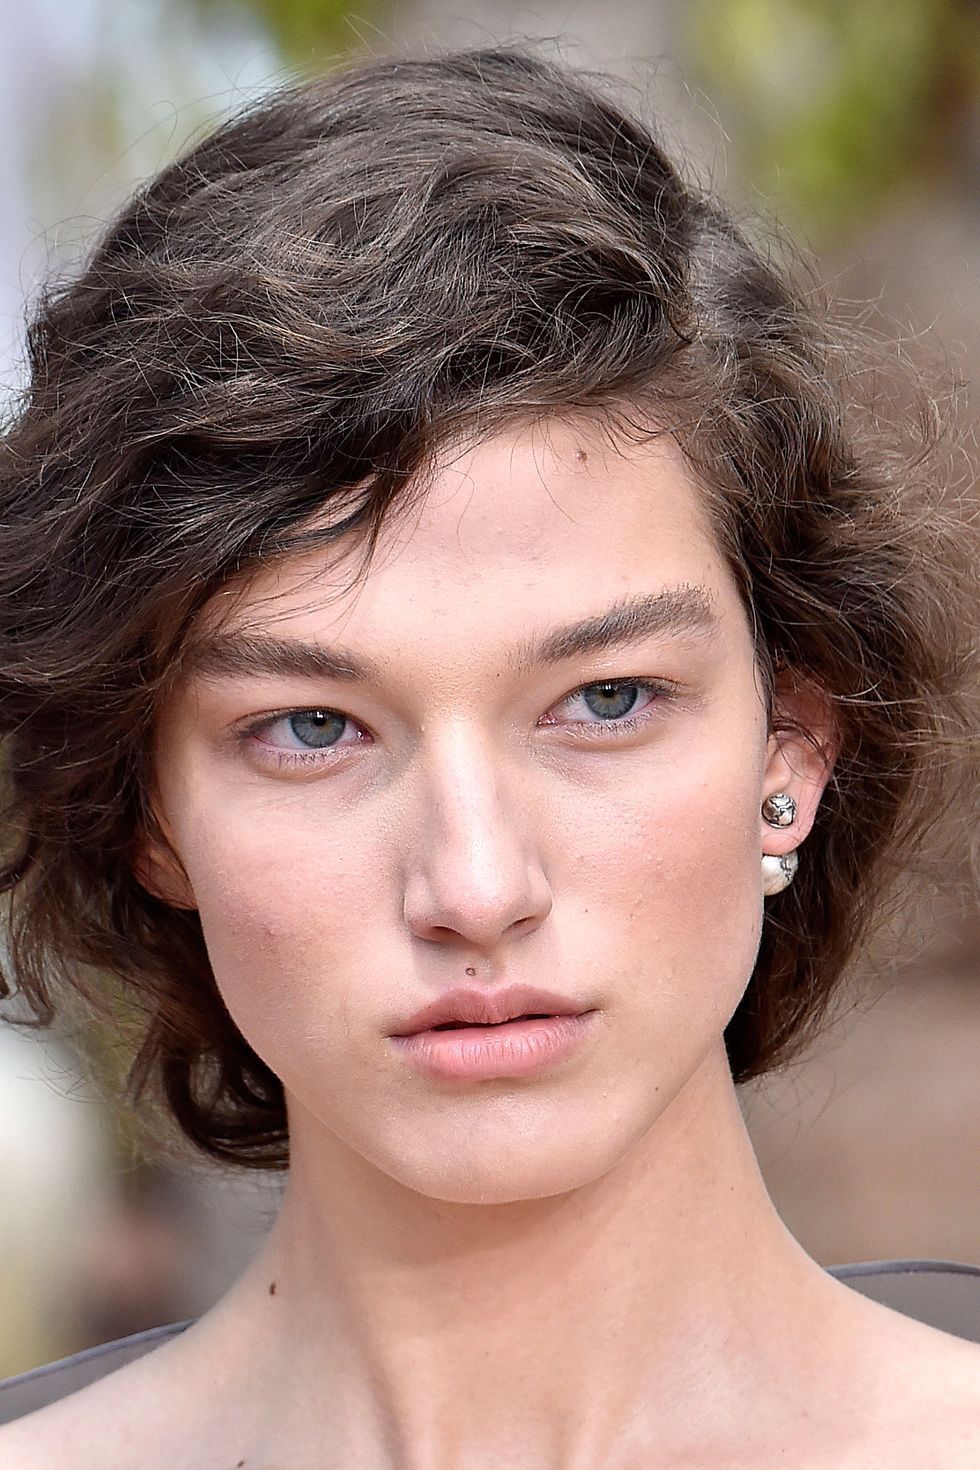 Dior couture - eyebrows trend